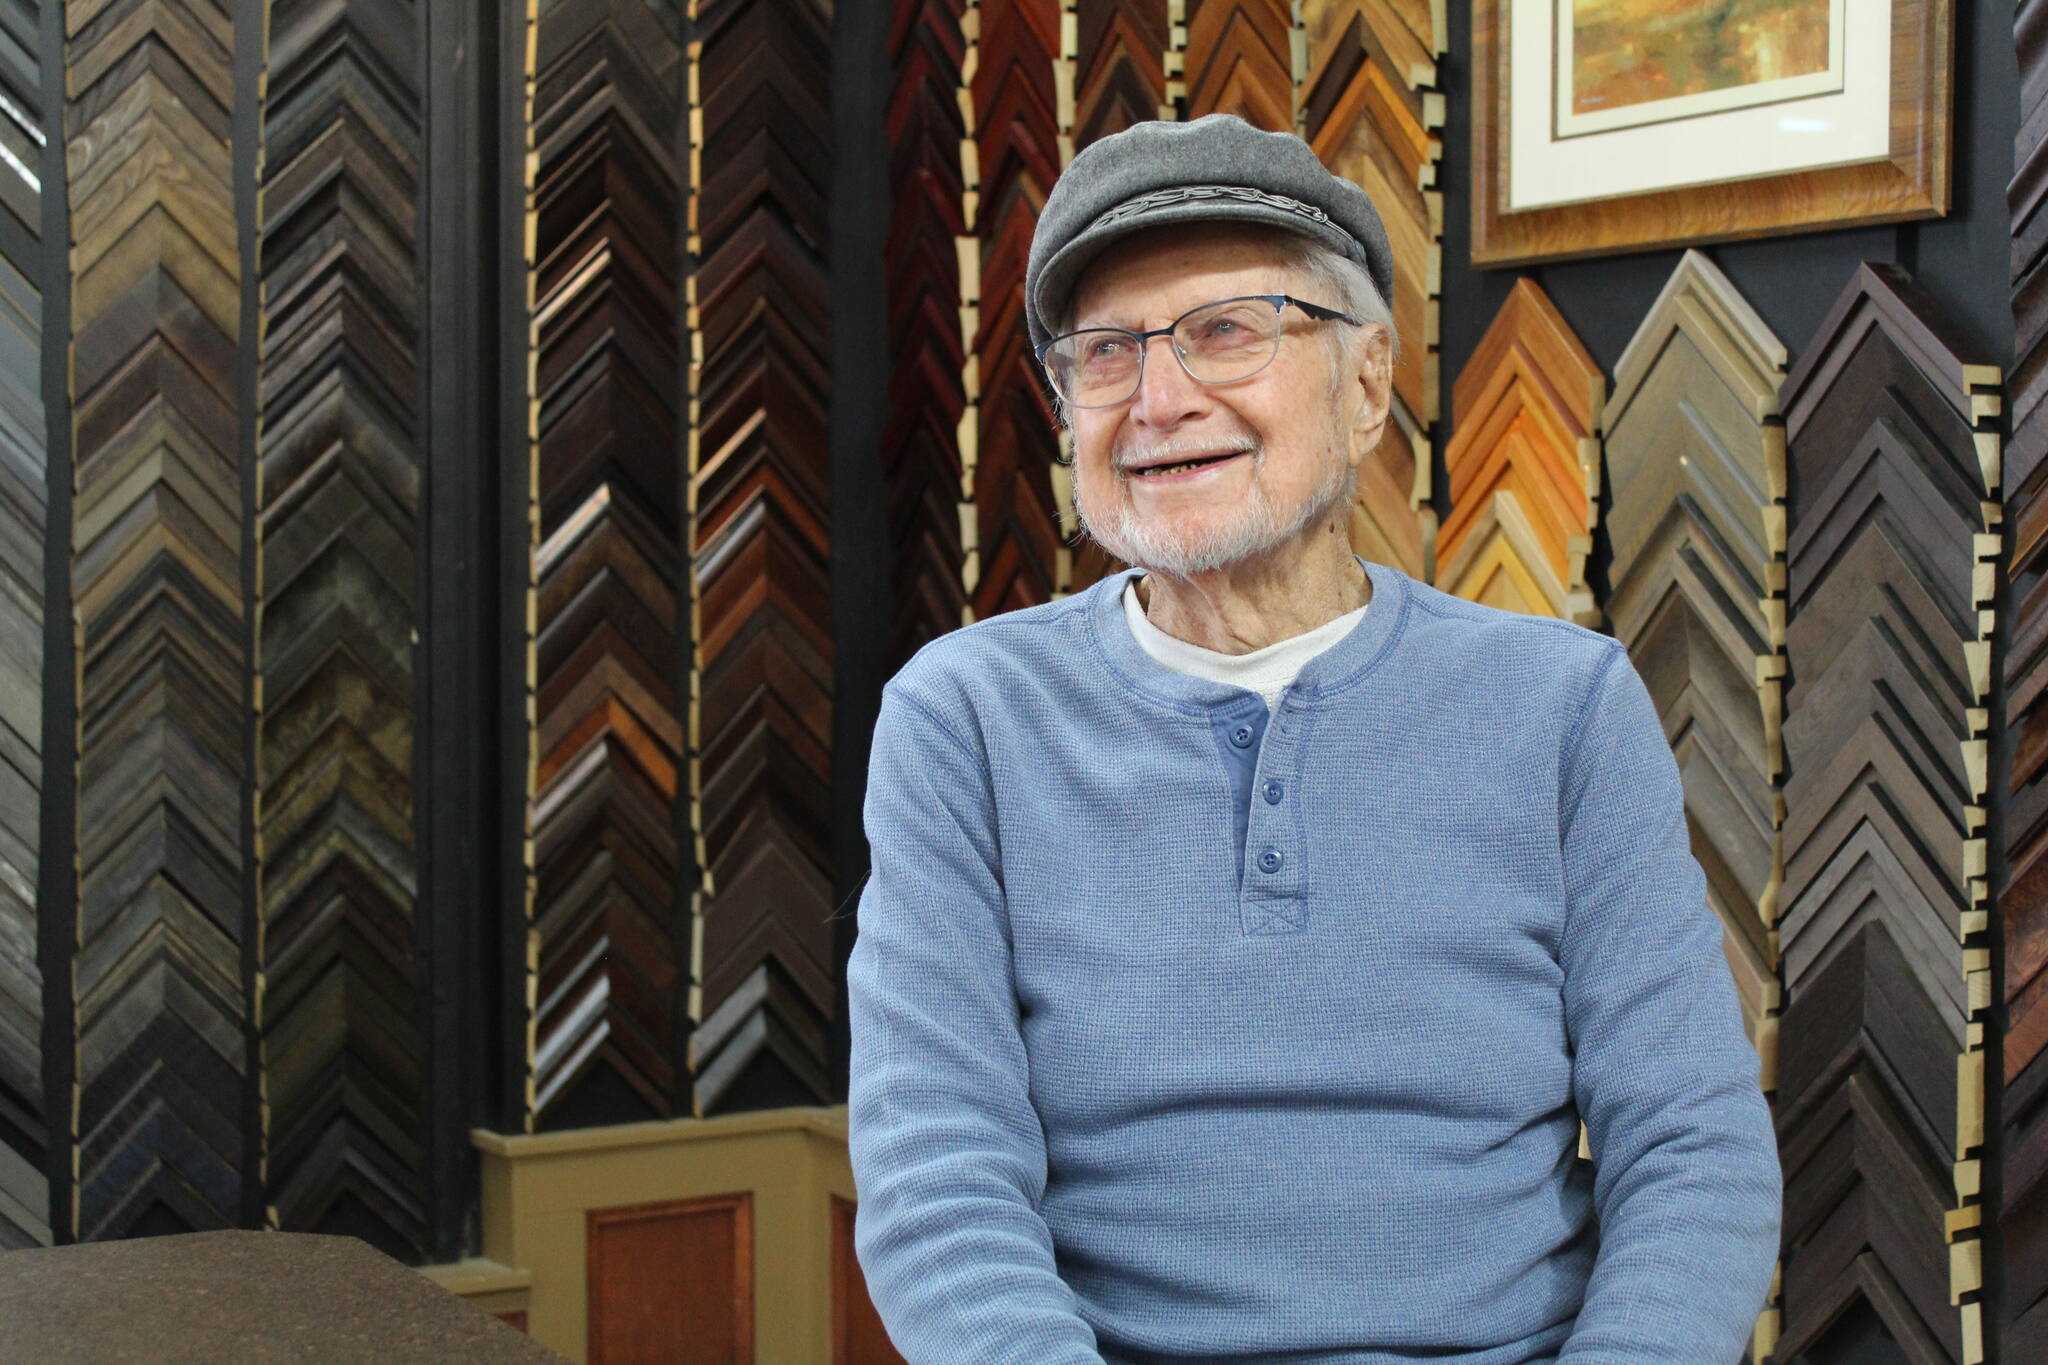 Photo by Karina Andrew/Whidbey News-Times
Soon-to-be centenarian Gene Phelps still works at Gene’s Art and Frame, the shop he founded in 1967.